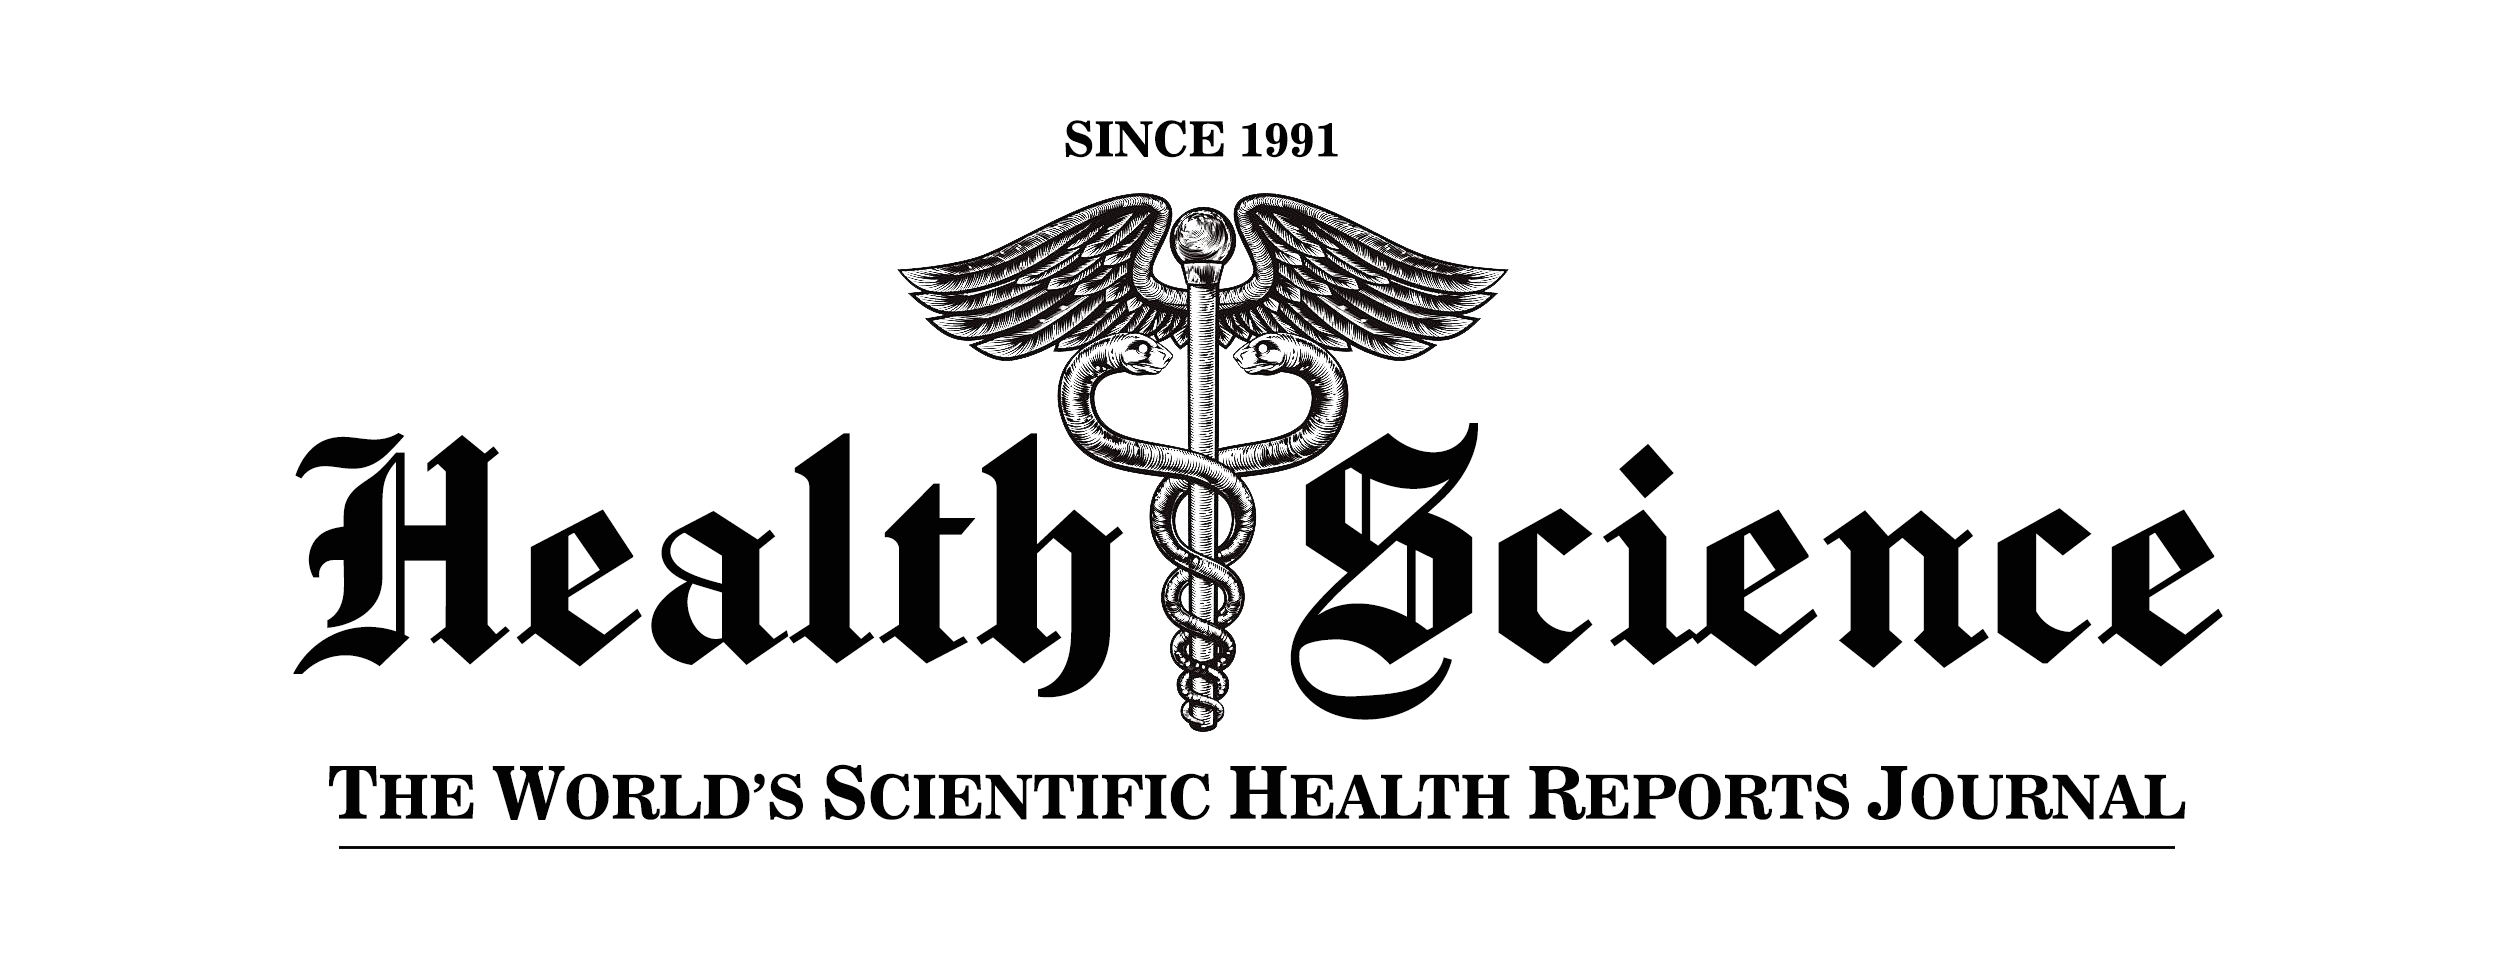 HEALTH AND SCIENCE LOGO